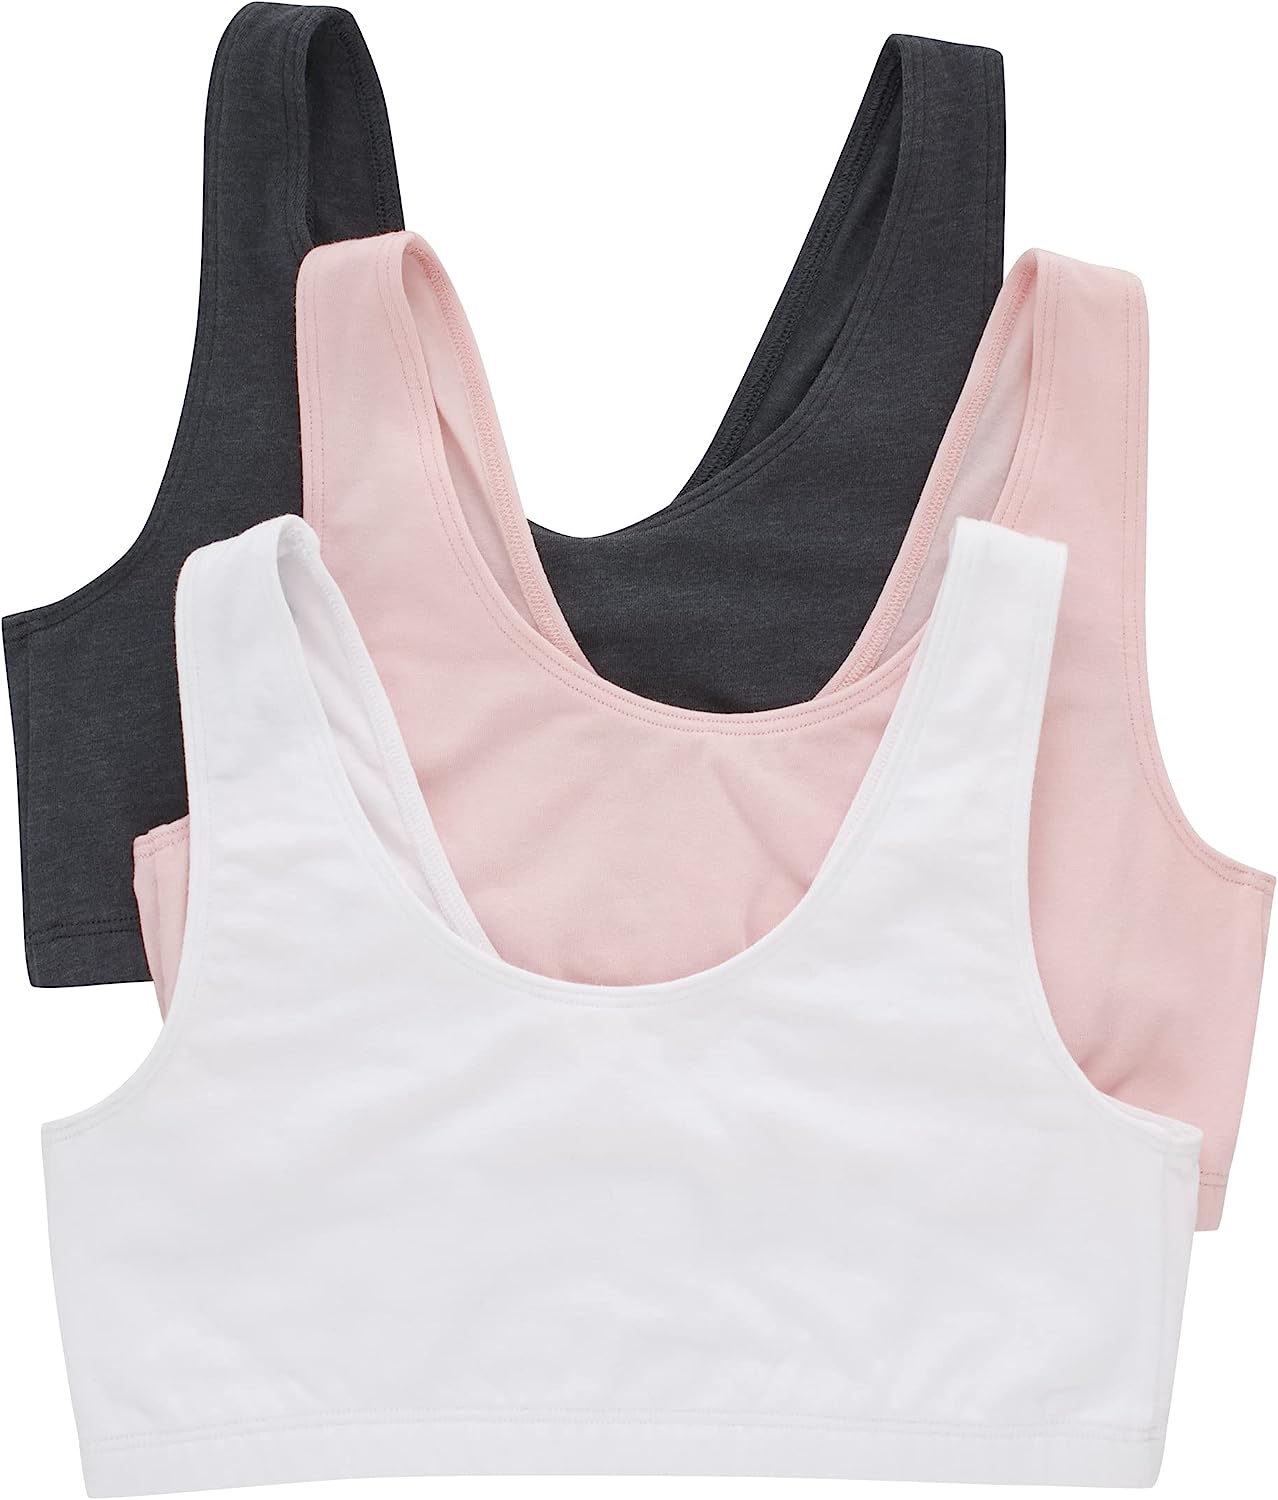 Hanes Womens Scoopneck Bralette Pack, Low-Impact Bra, Cooling Stretch ...